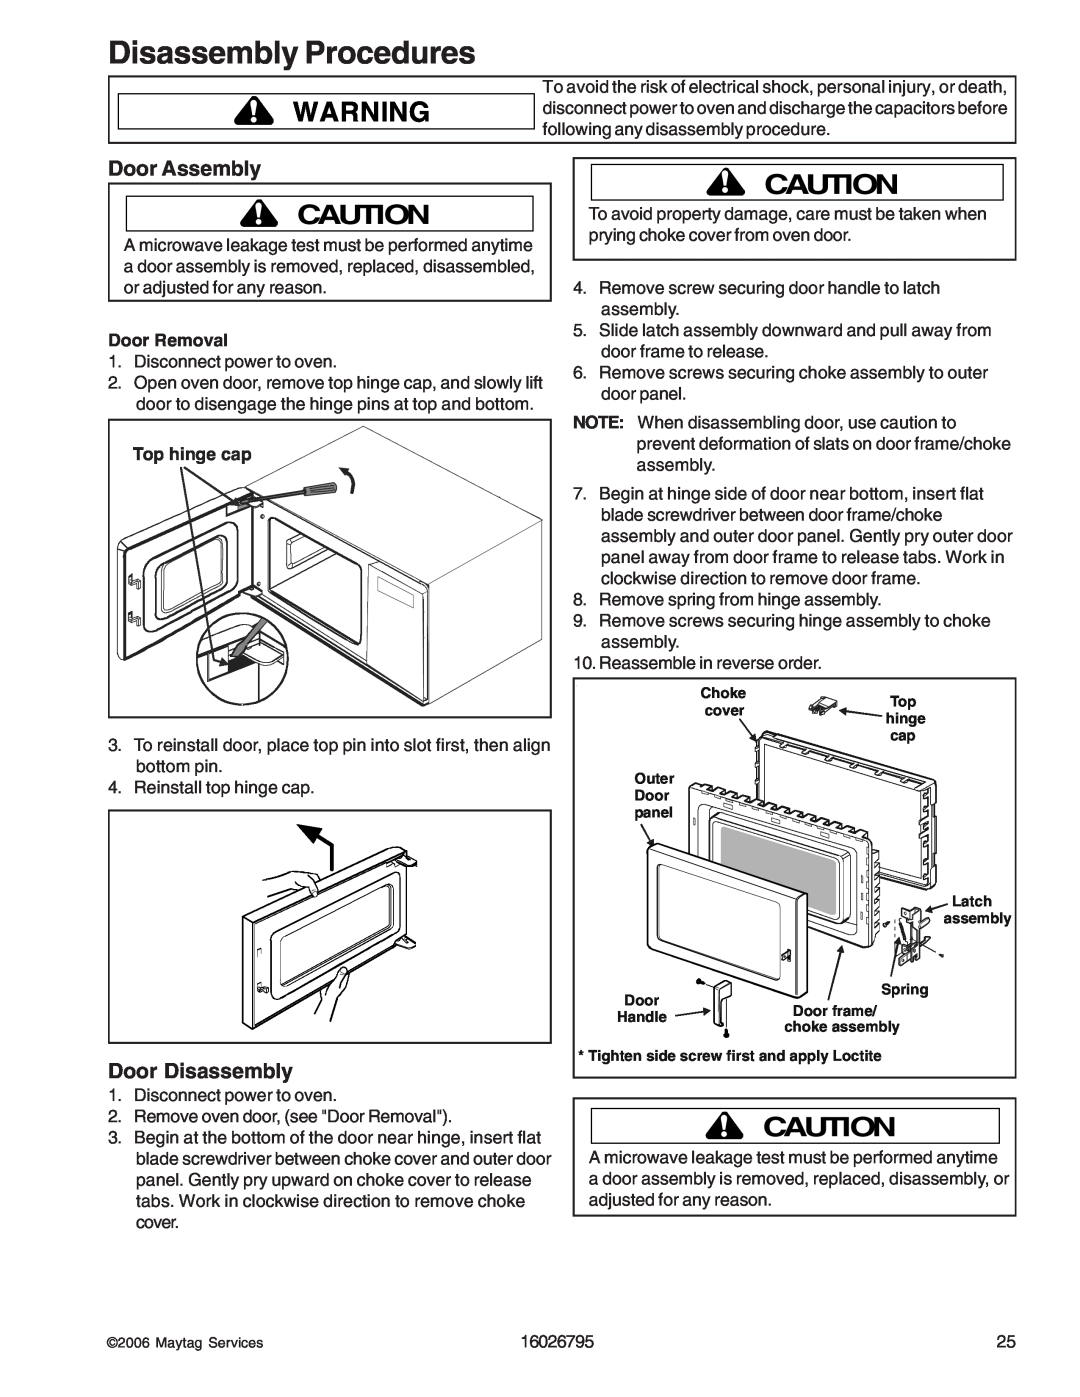 Maytag 1800 W - 2005 manual Door Assembly, Door Disassembly, Disassembly Procedures, Door Removal 